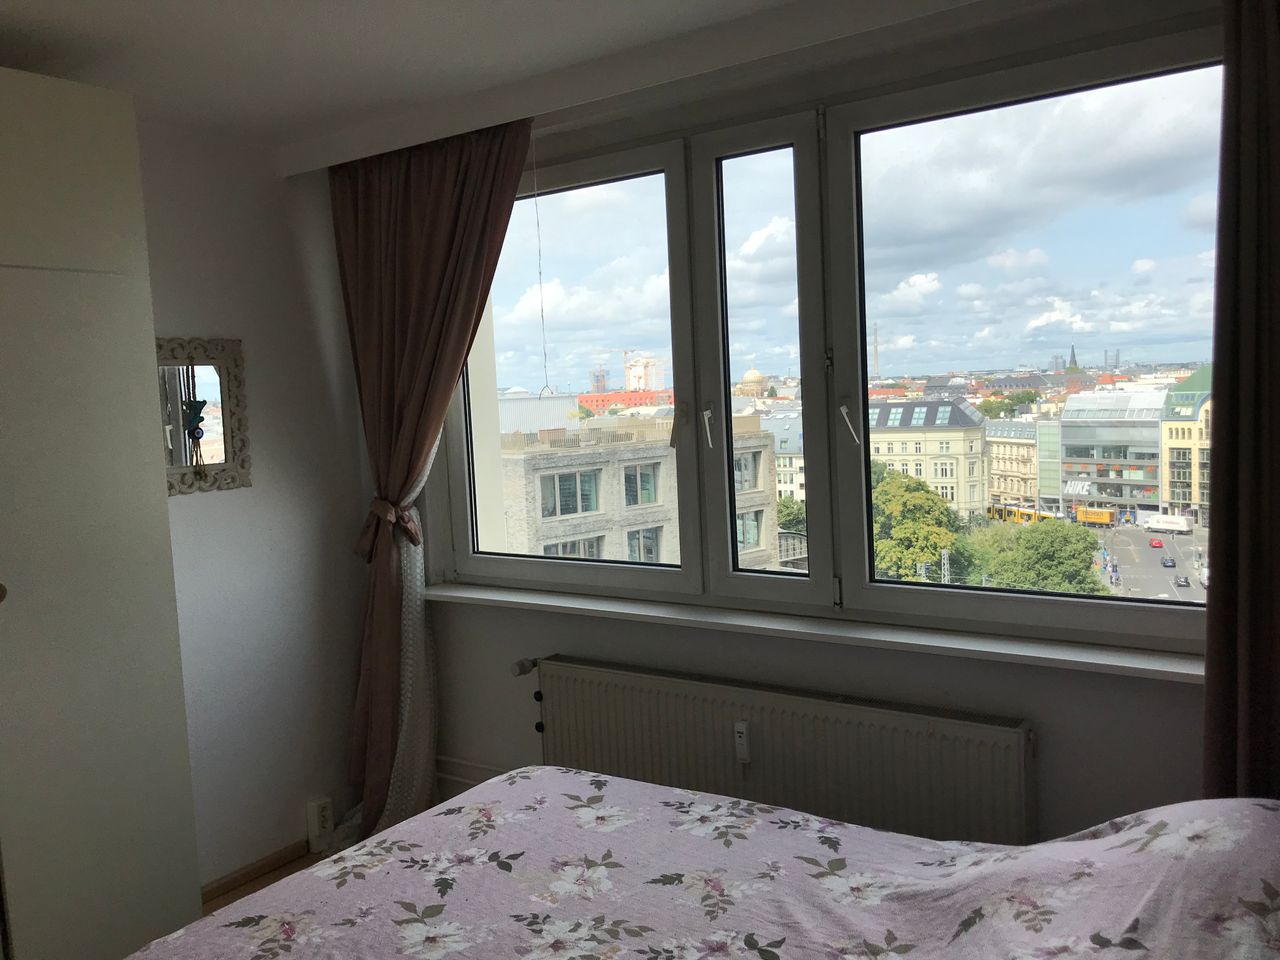 Apartment with view in the center of Berlin